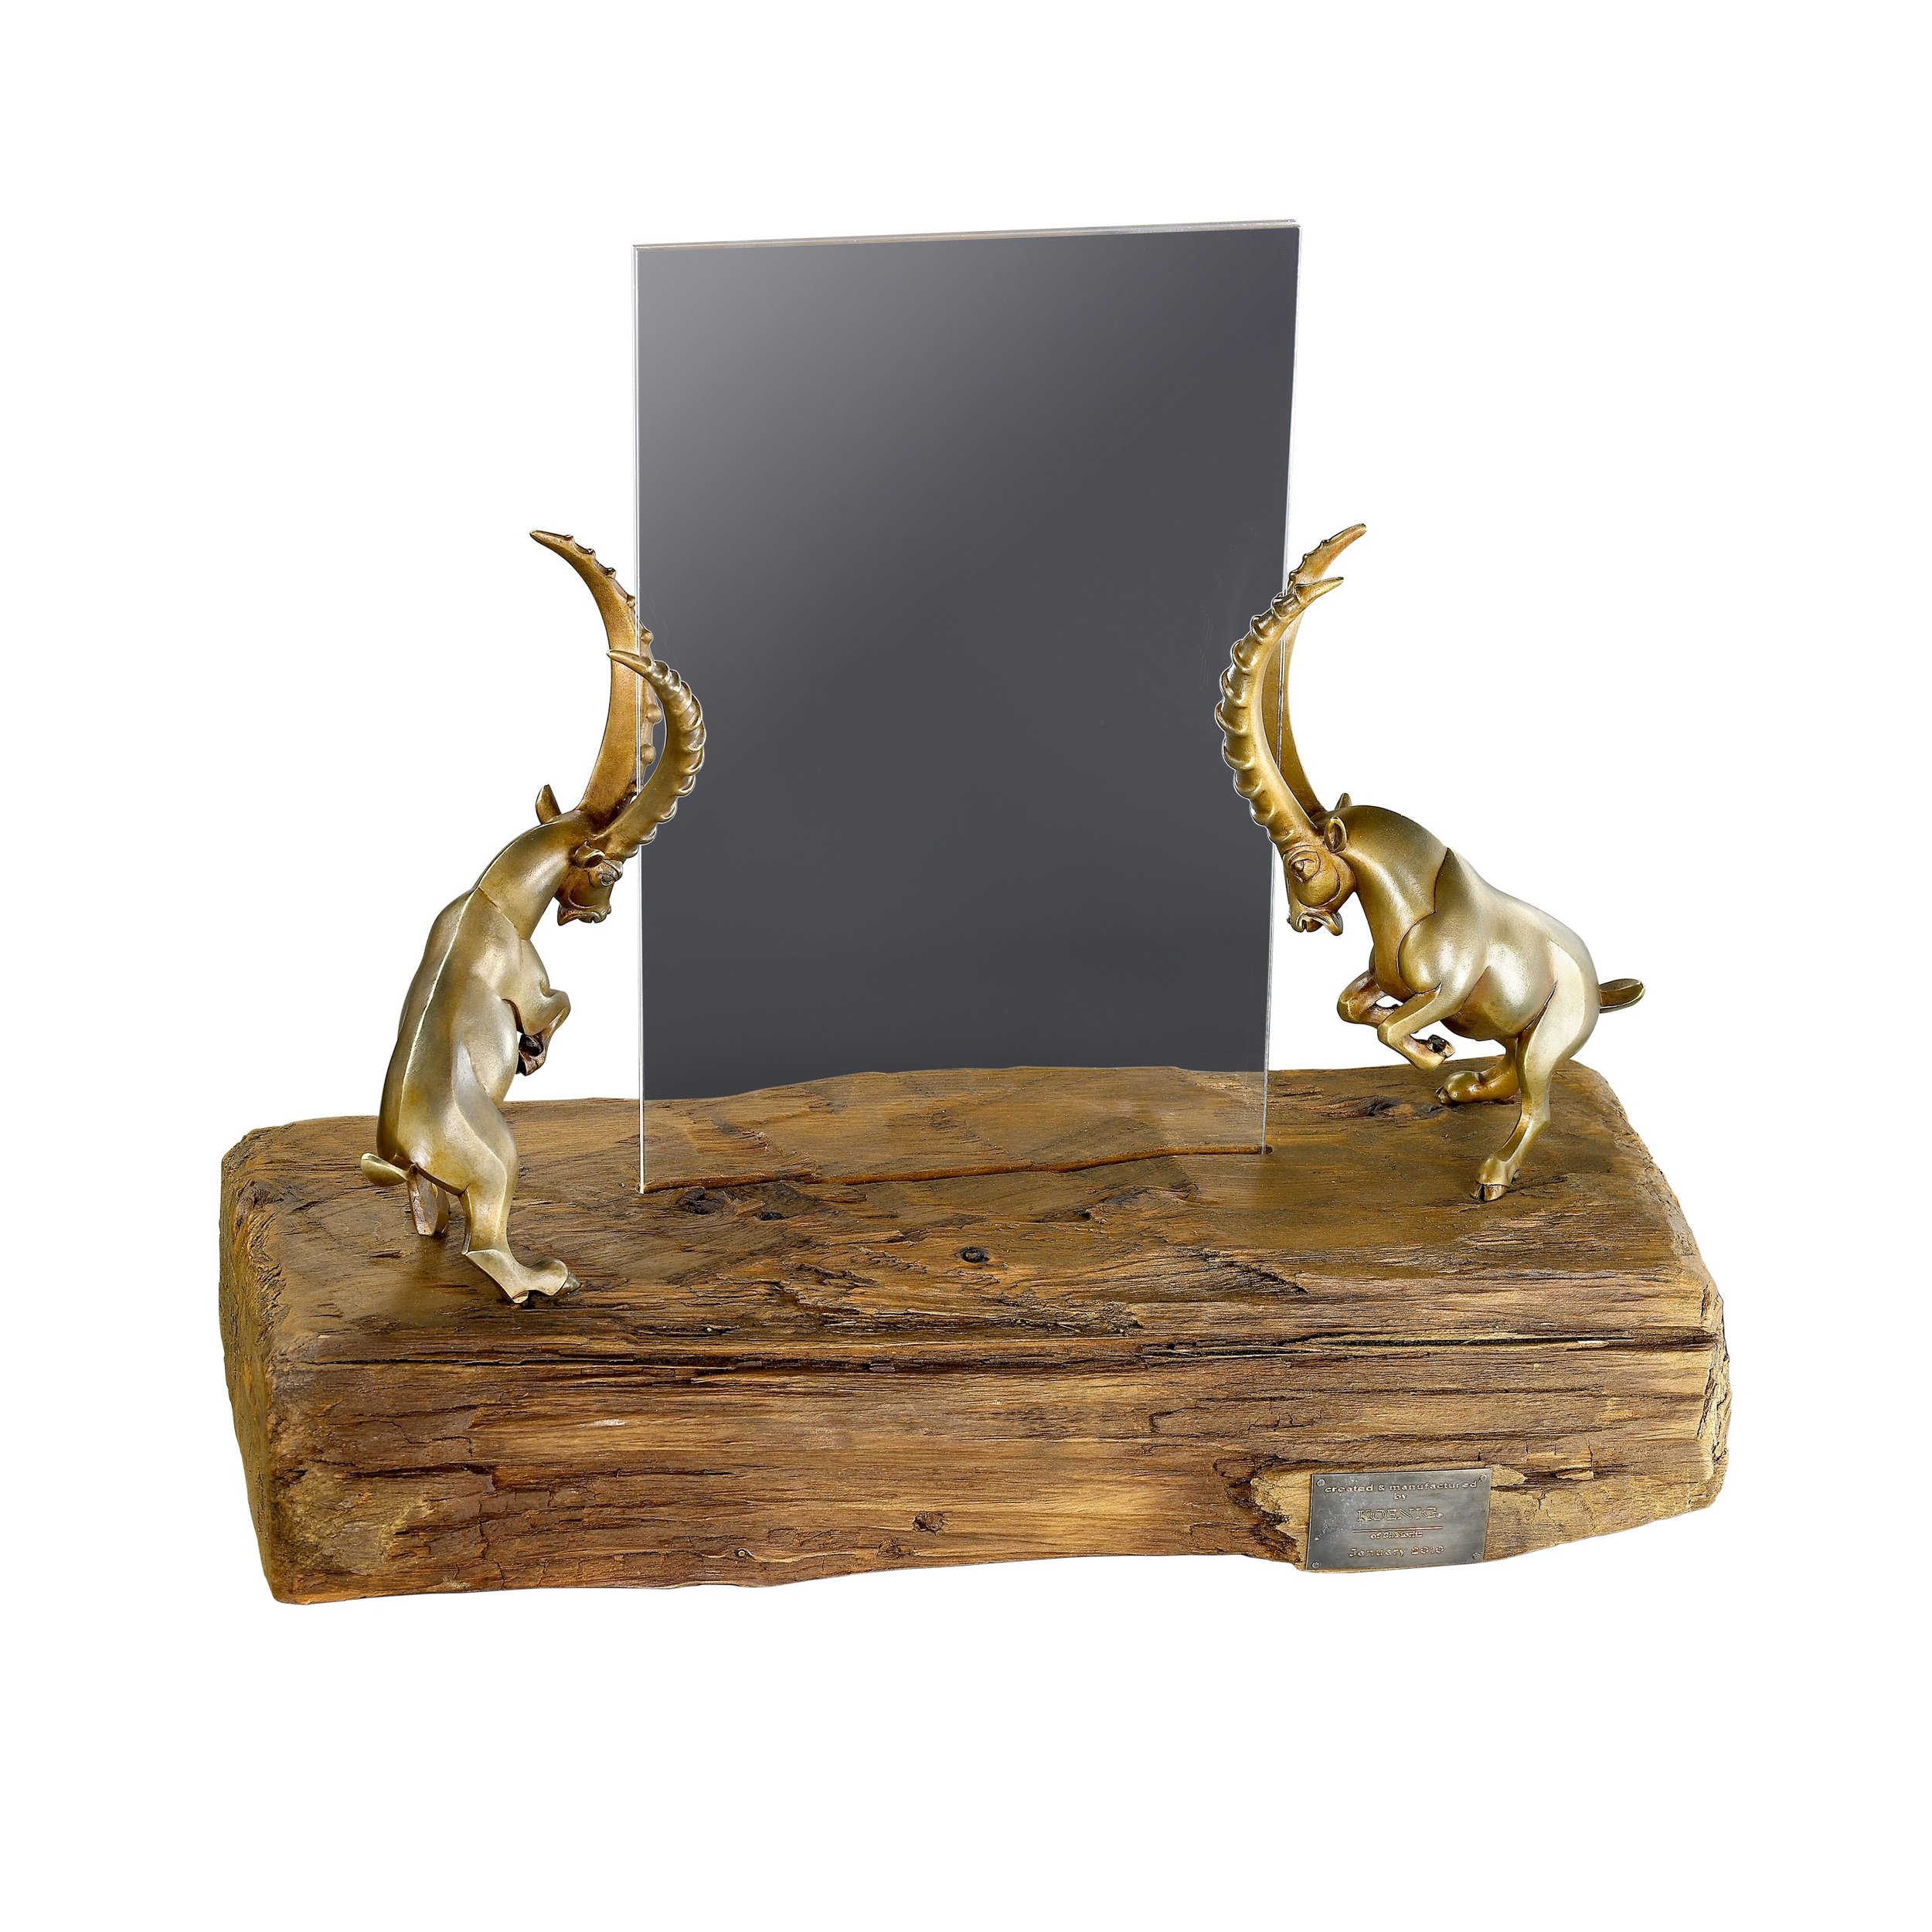 512. ibex picture frame copy.jpg